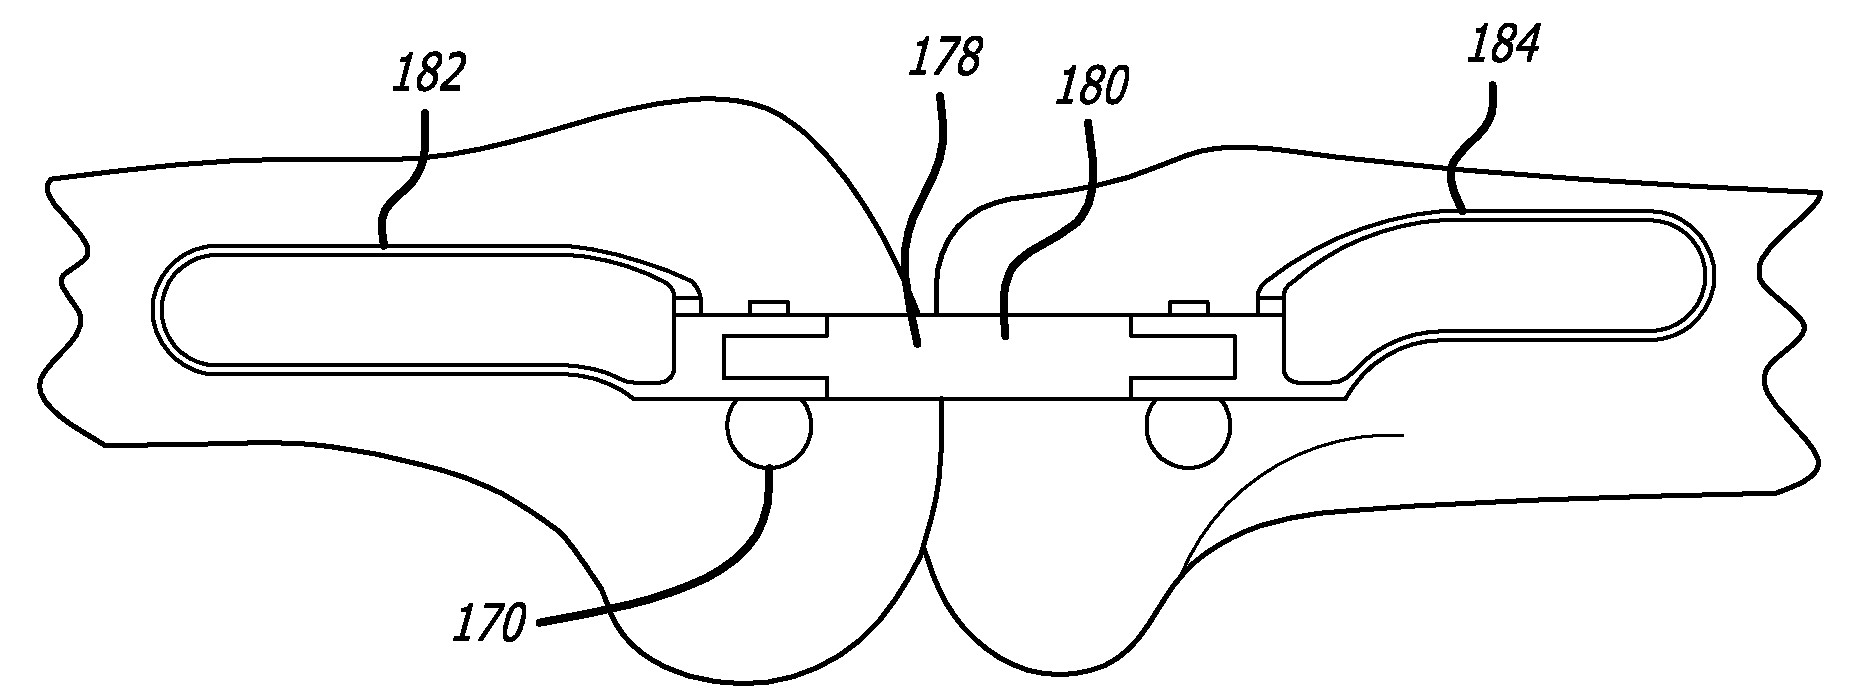 Surgical implantation method and devices for an extra-articular mechanical energy absorbing apparatus